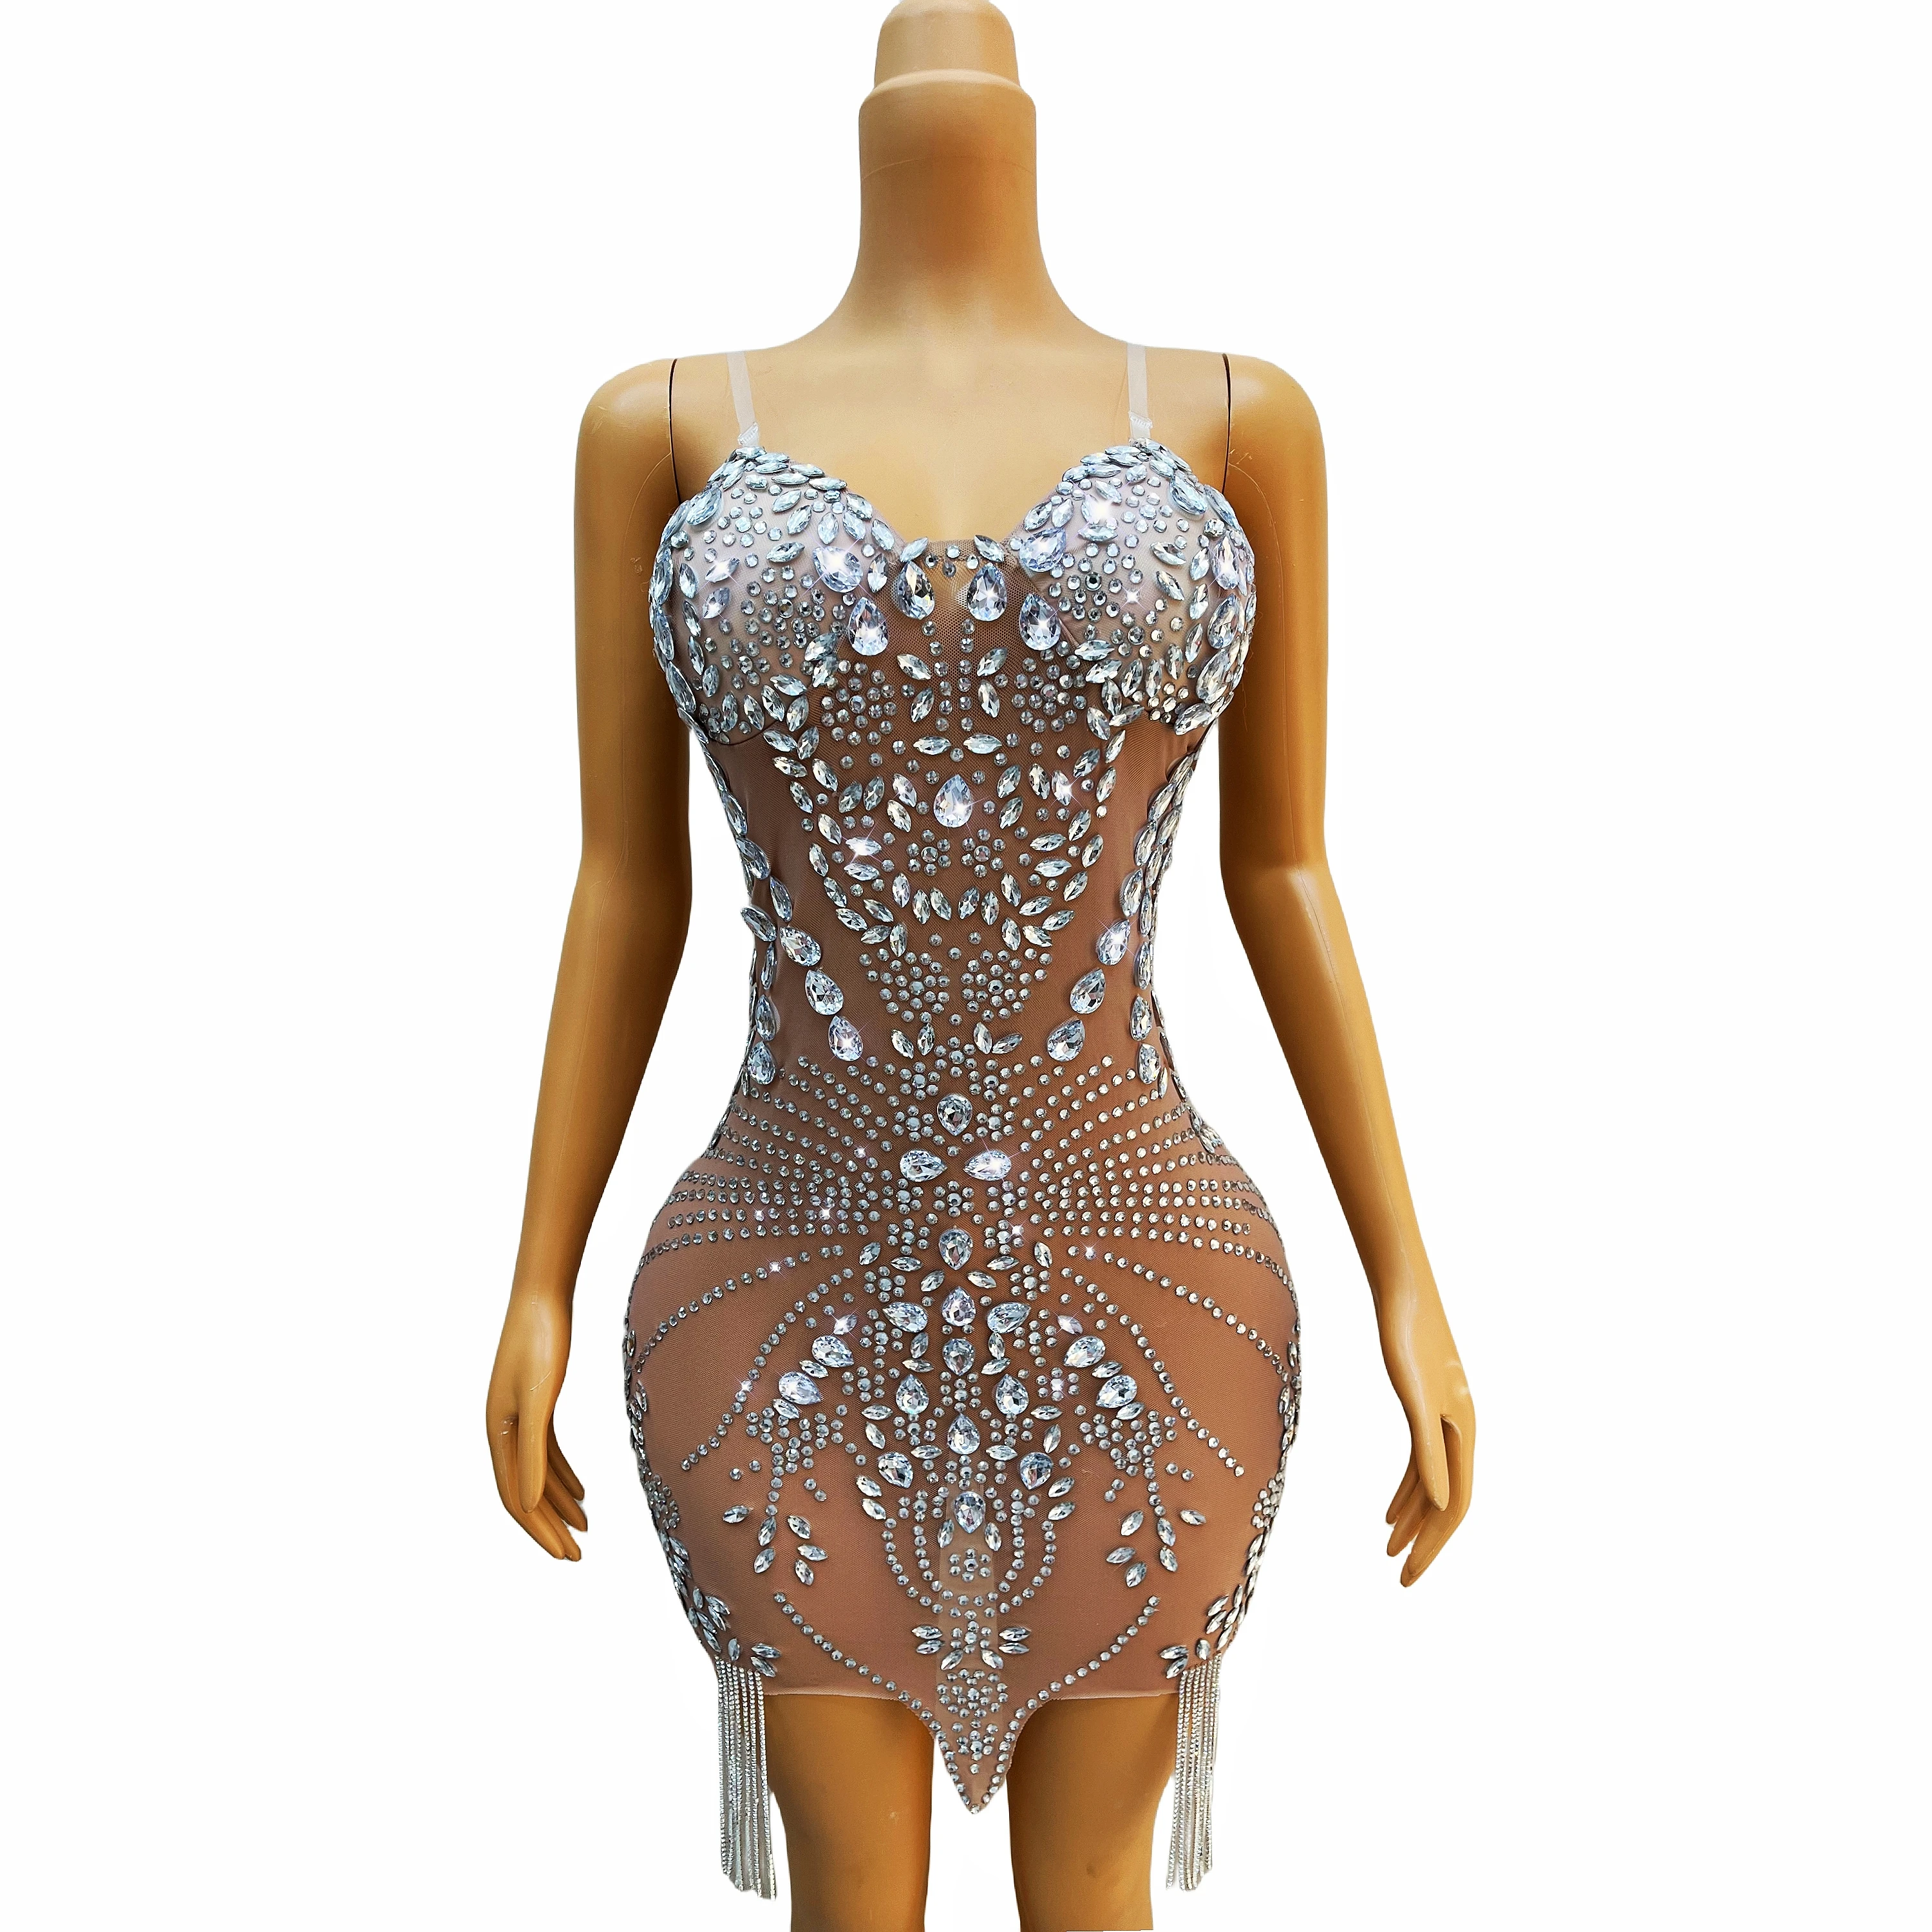 

Shining Silver Rhinestones Fringes Transparent Dress Evening Birthday Celebrate Stretch Outfit Sexy Costume Crystals Dress pipa